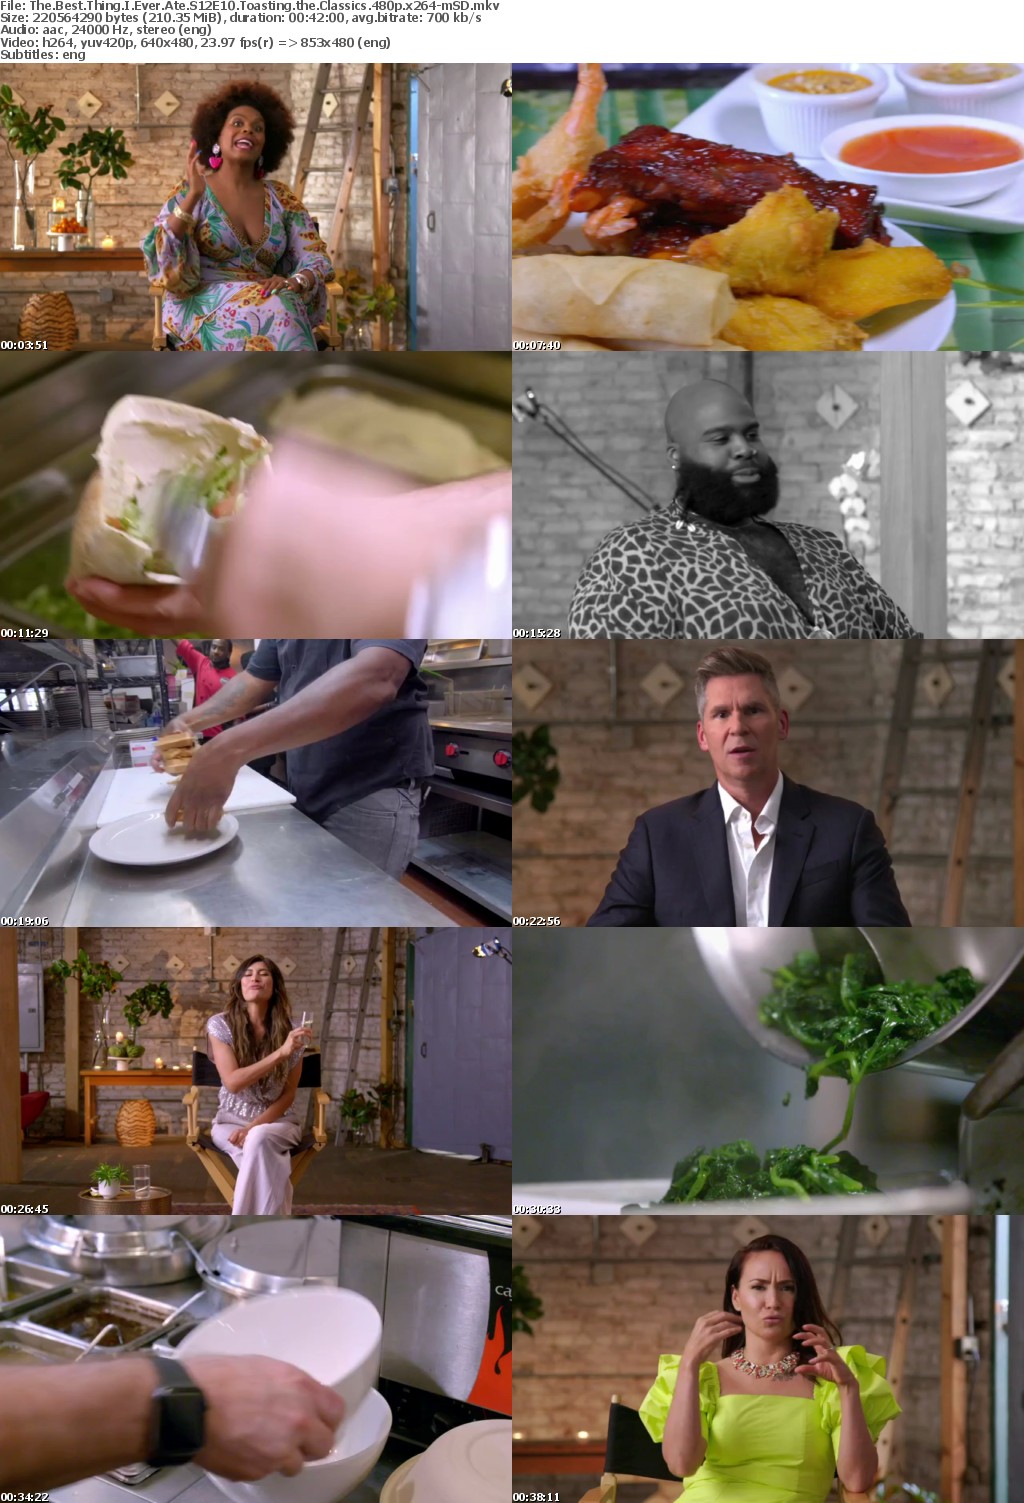 The Best Thing I Ever Ate S12E10 Toasting the Classics 480p x264-mSD